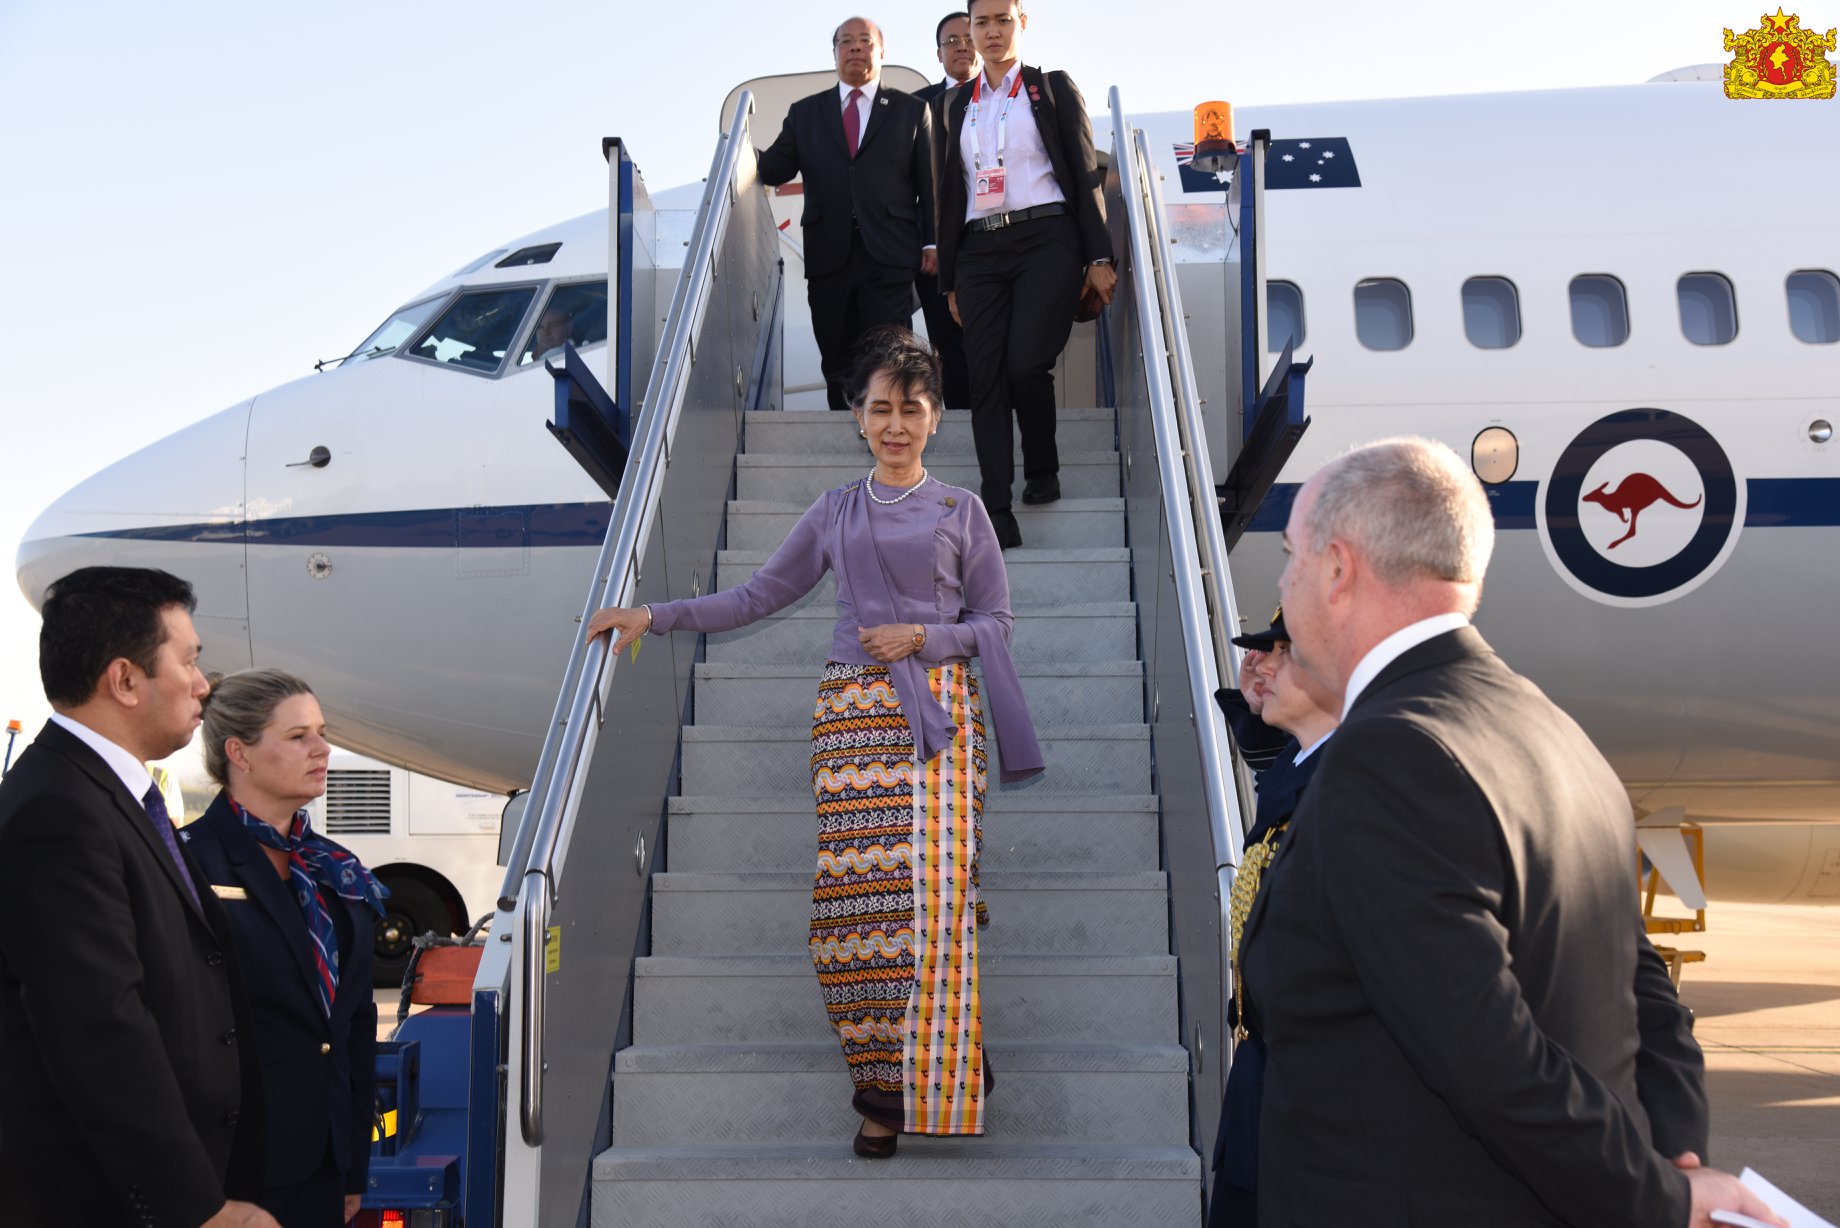 Myanmar State Counsellor Aung San Suu Kyi arrives at the ASEAN summit in Sydney on March 18, 2018. Photo: Office of the State Counsellor